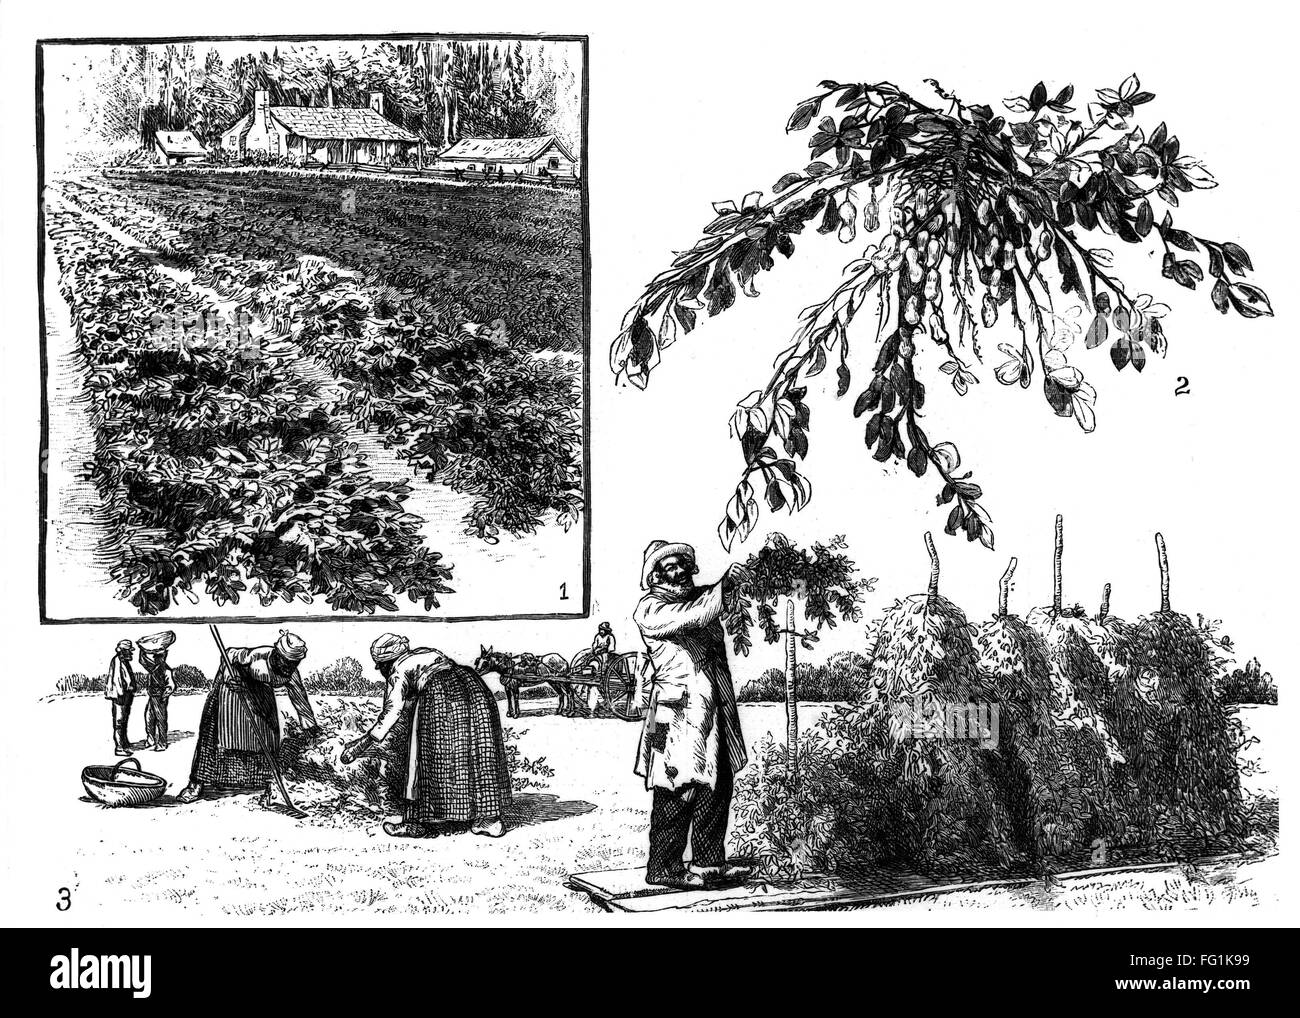 Slavery Mid 19th Century Nslaves At Work In Field Engraving Mid